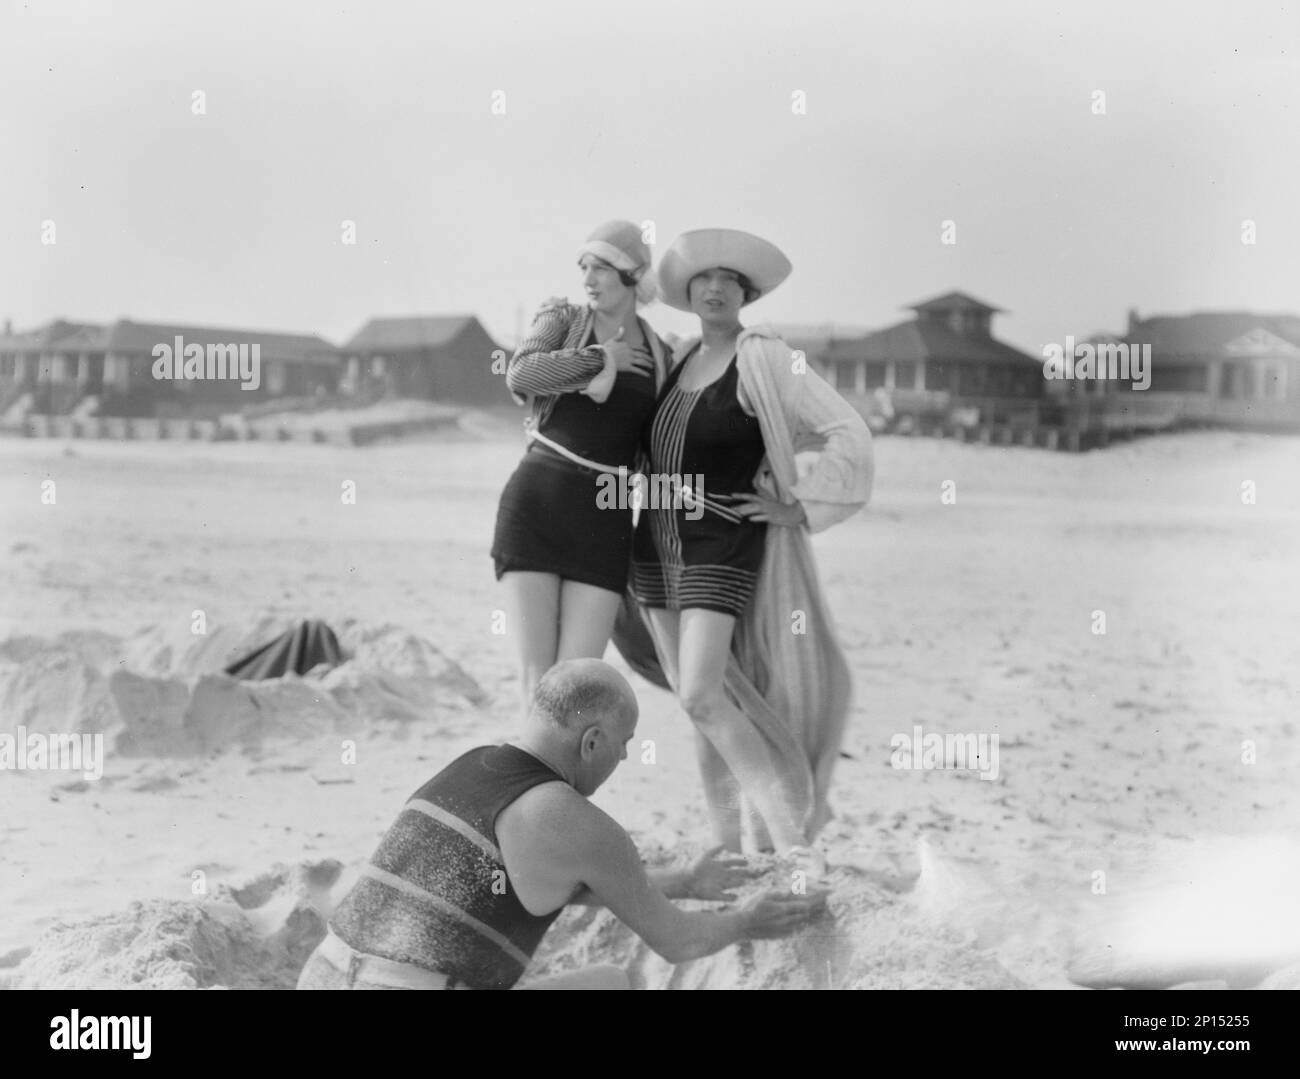 Unidentified man building sand castle and two women, Long Beach, New York, between 1911 and 1942. Stock Photo